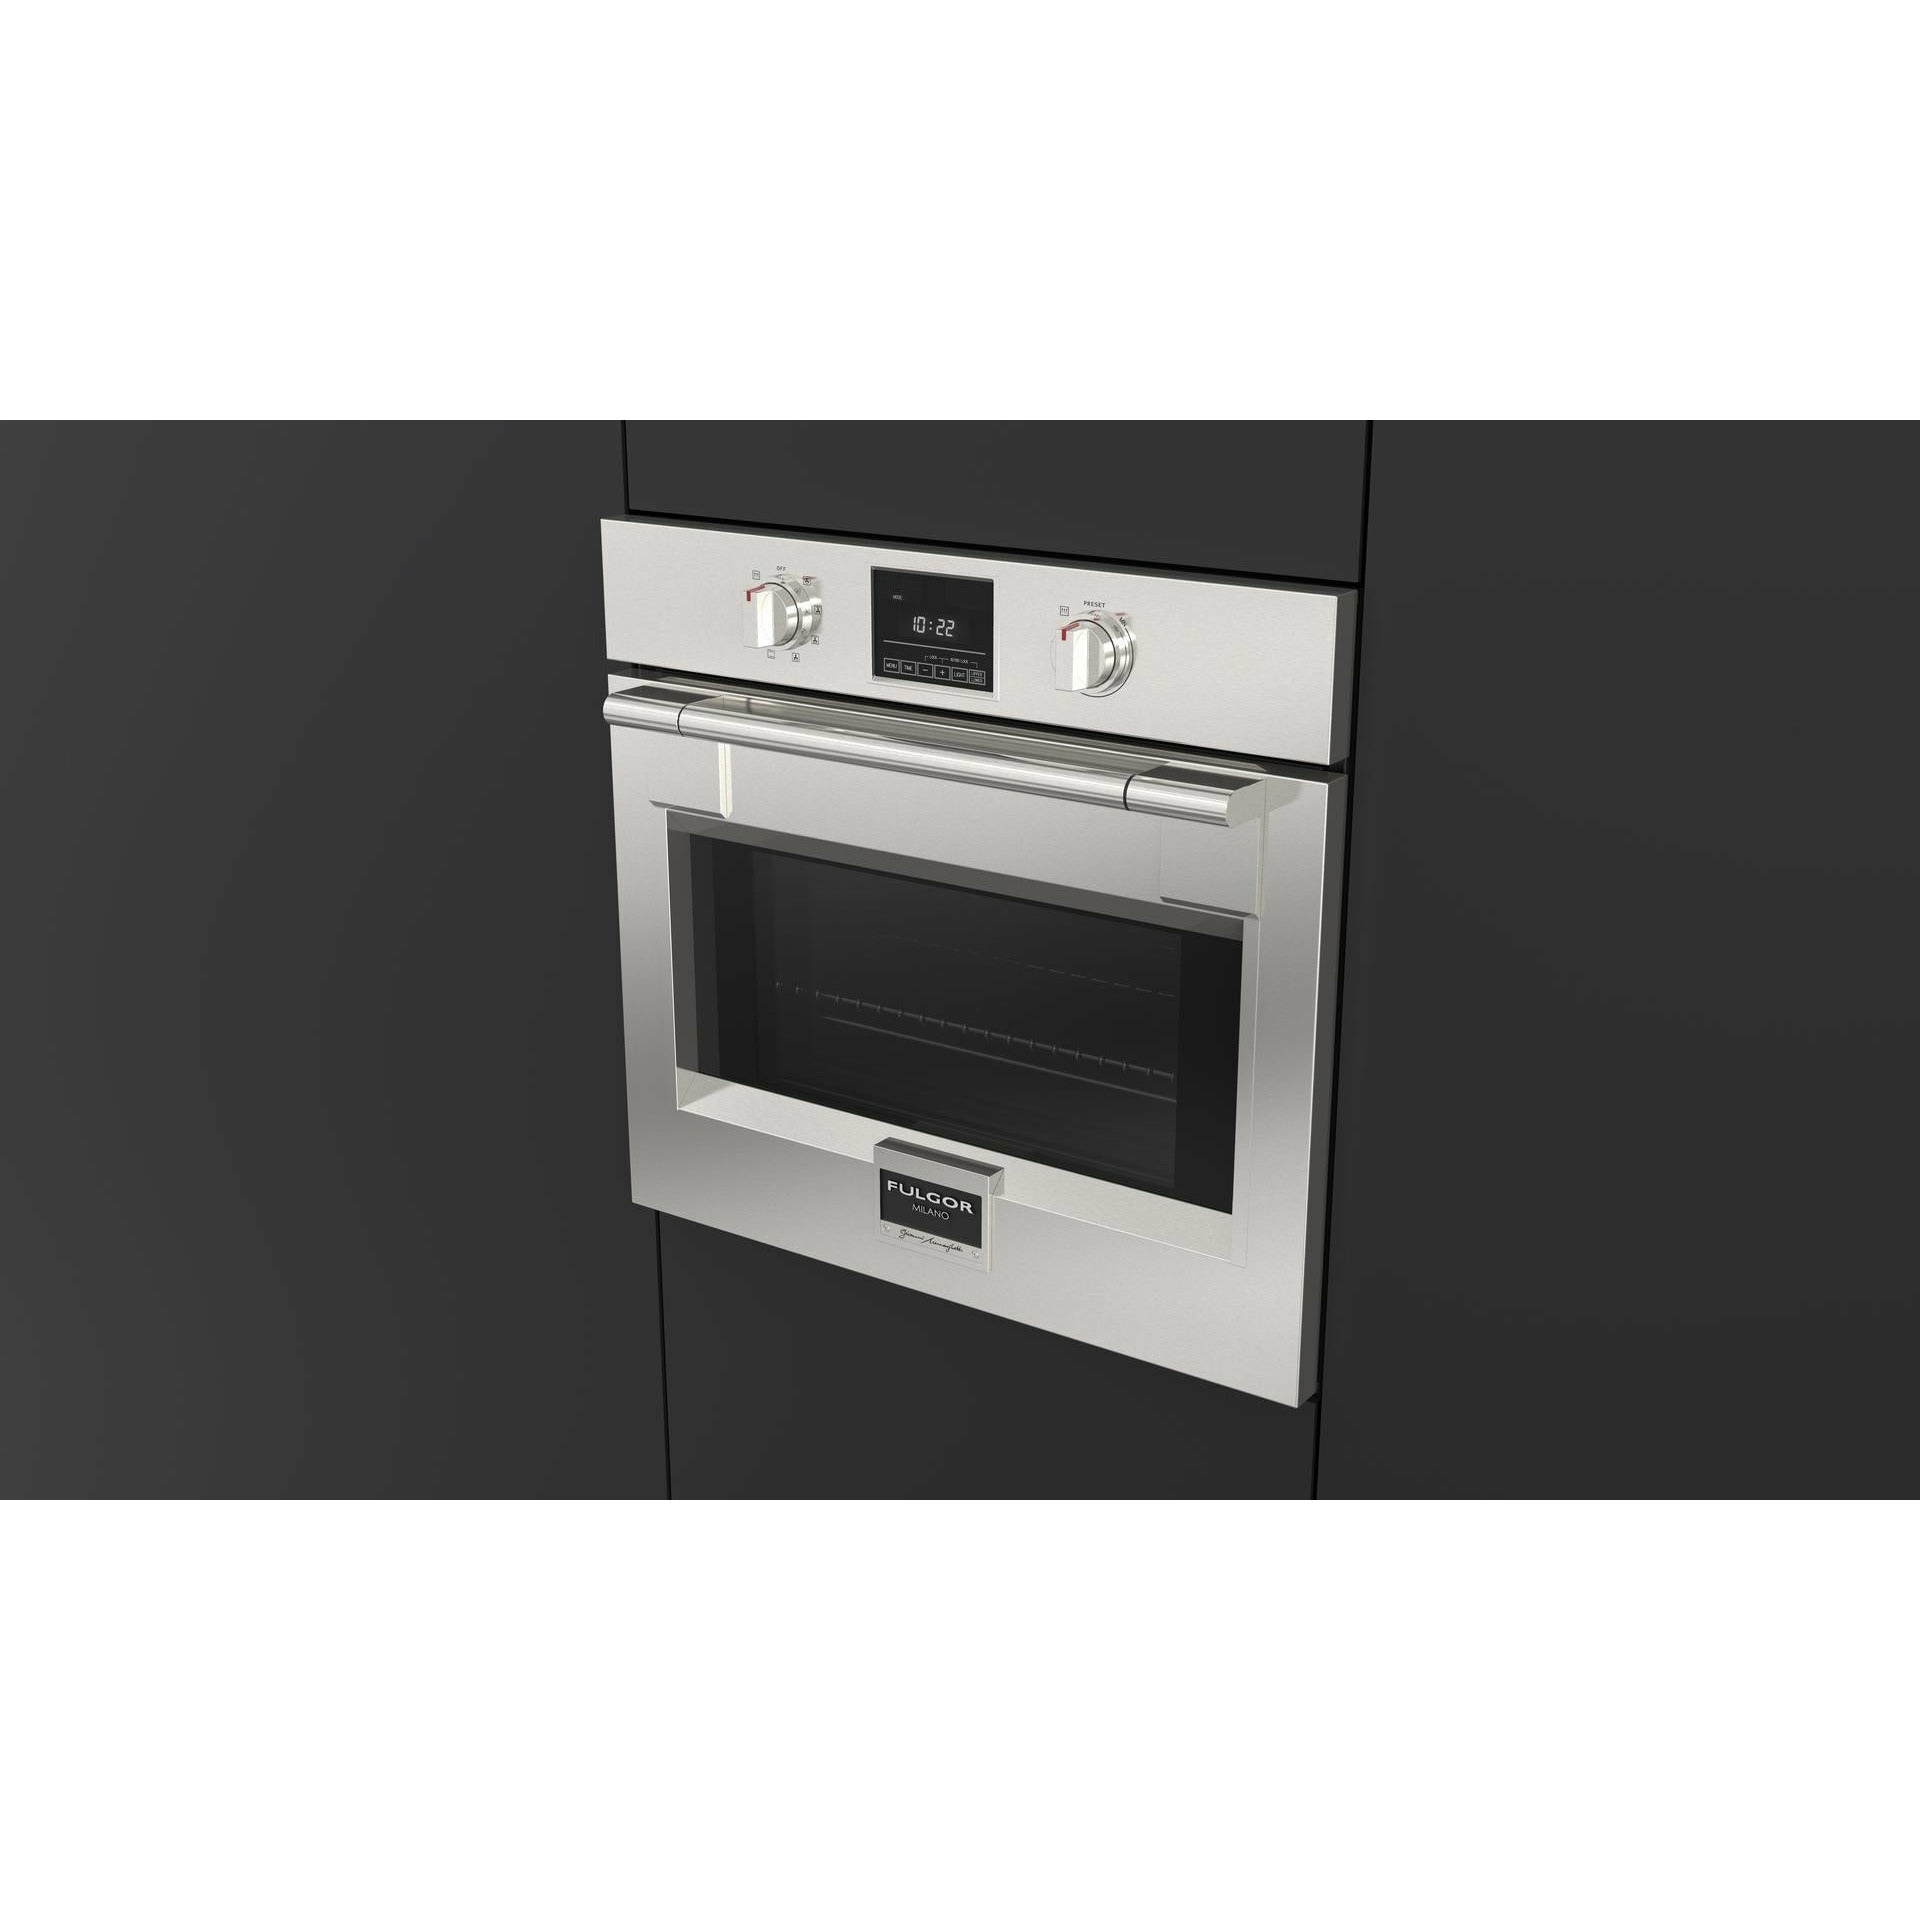 Fulgor Milano 30" Single Electric Wall Oven with 4.4 cu. ft. Gross Capacity, Stainless Steel - F6PSP30S1